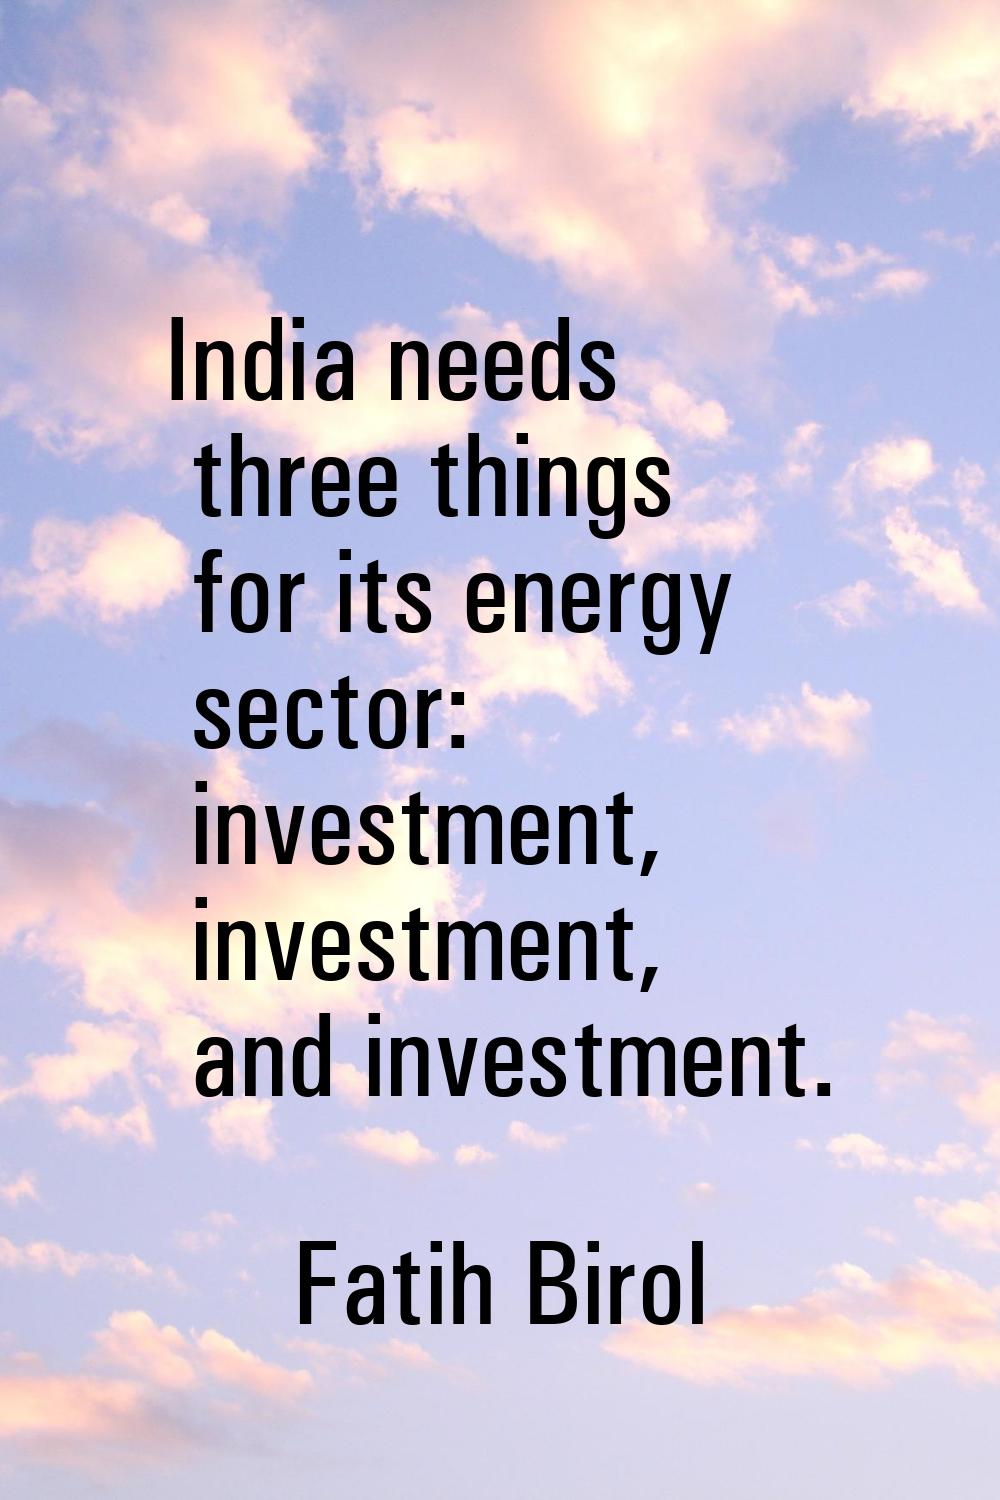 India needs three things for its energy sector: investment, investment, and investment.